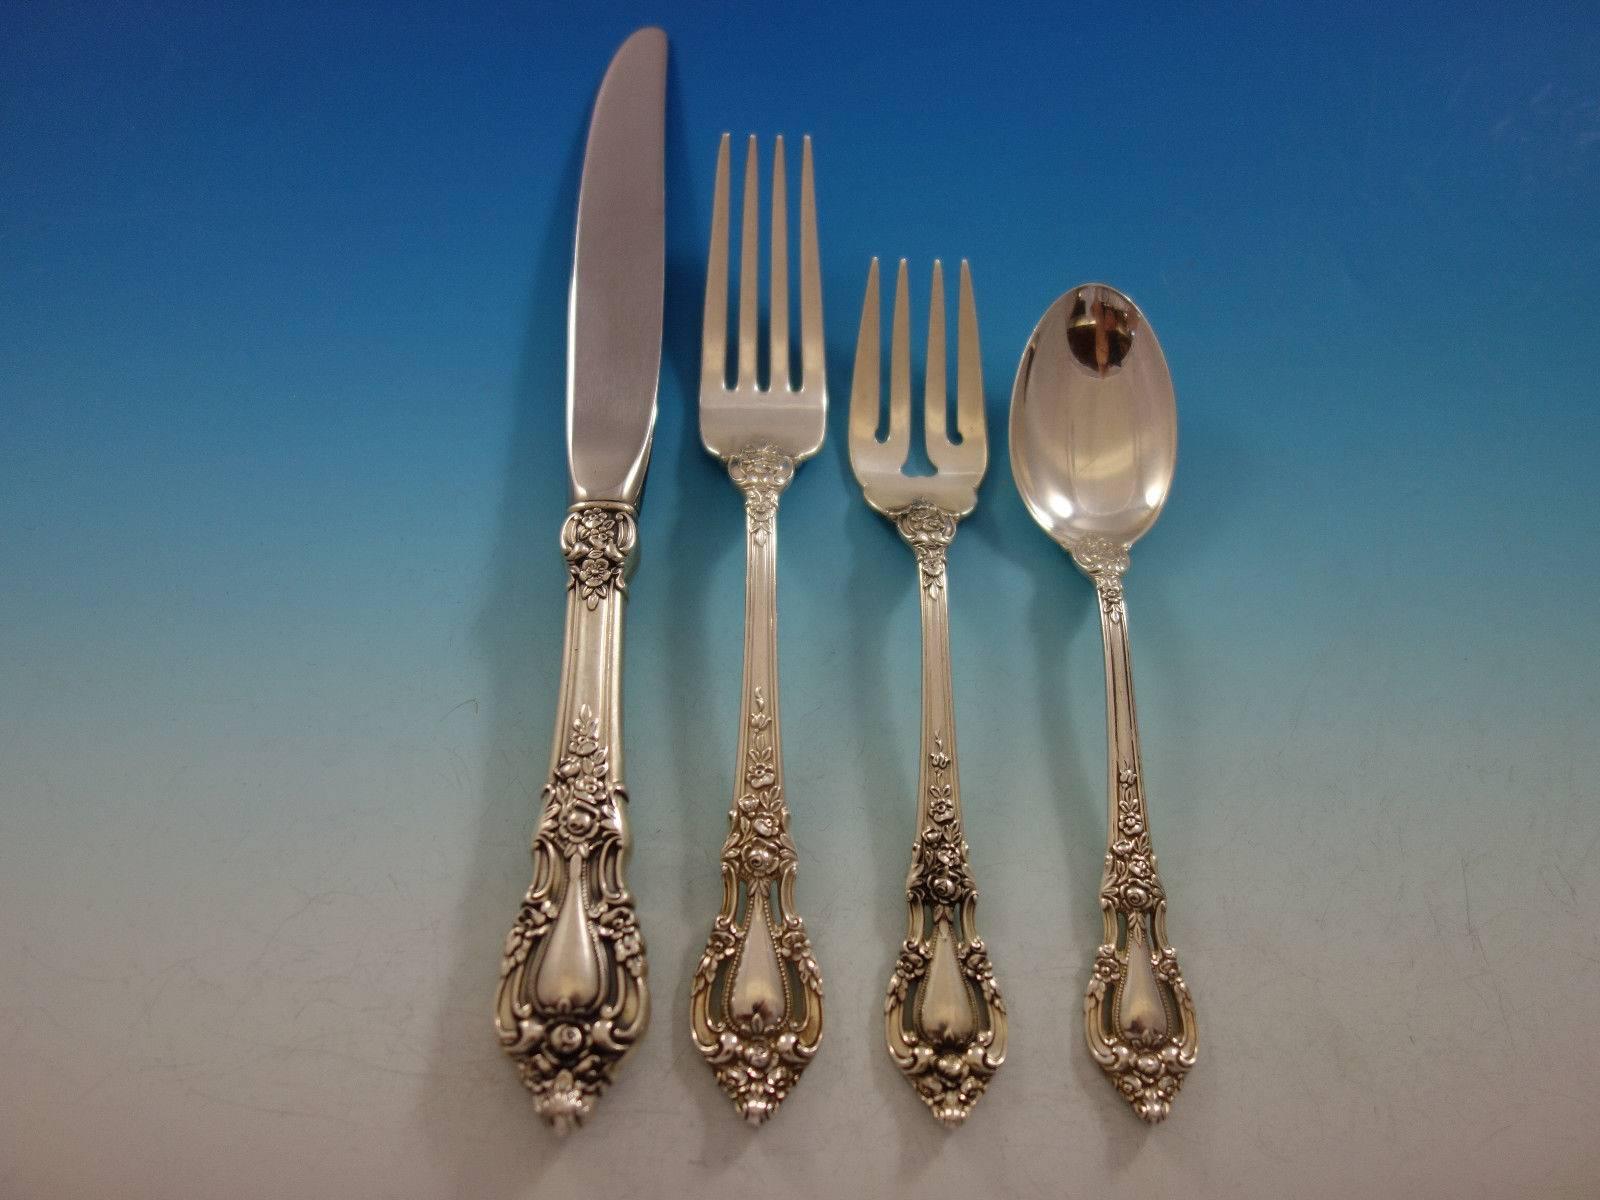 Eloquence by Lunt Sterling Silver Flatware Service Set 48 Pieces Dinner Size In Excellent Condition For Sale In Big Bend, WI